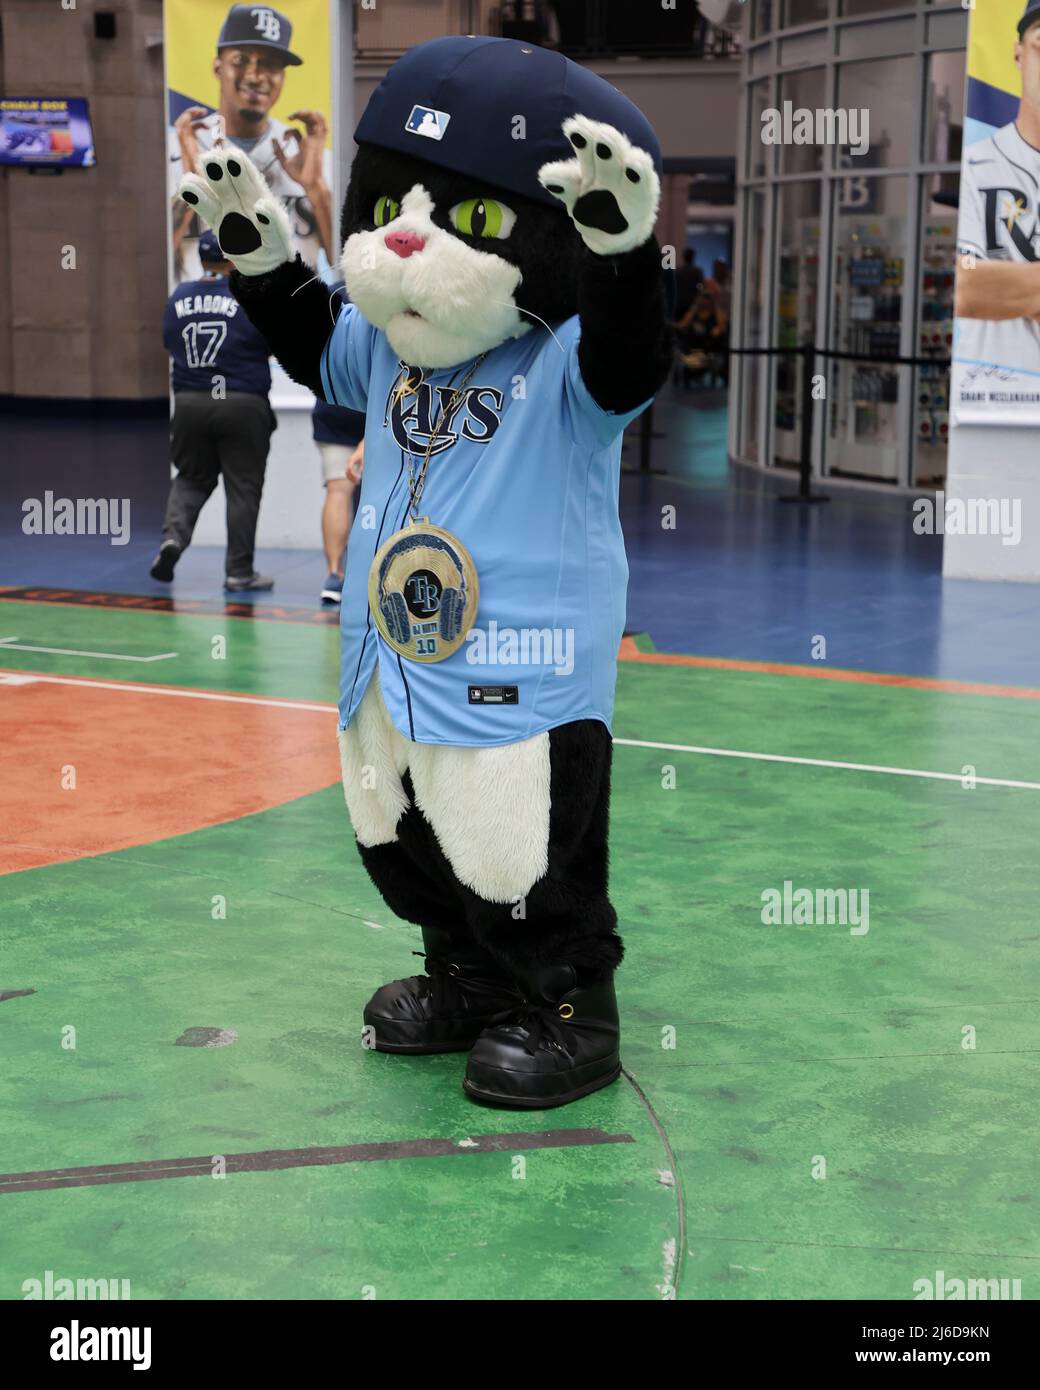 St. Petersburg, FL. USA; D.J. Kitty, one of the Tampa Bay Rays